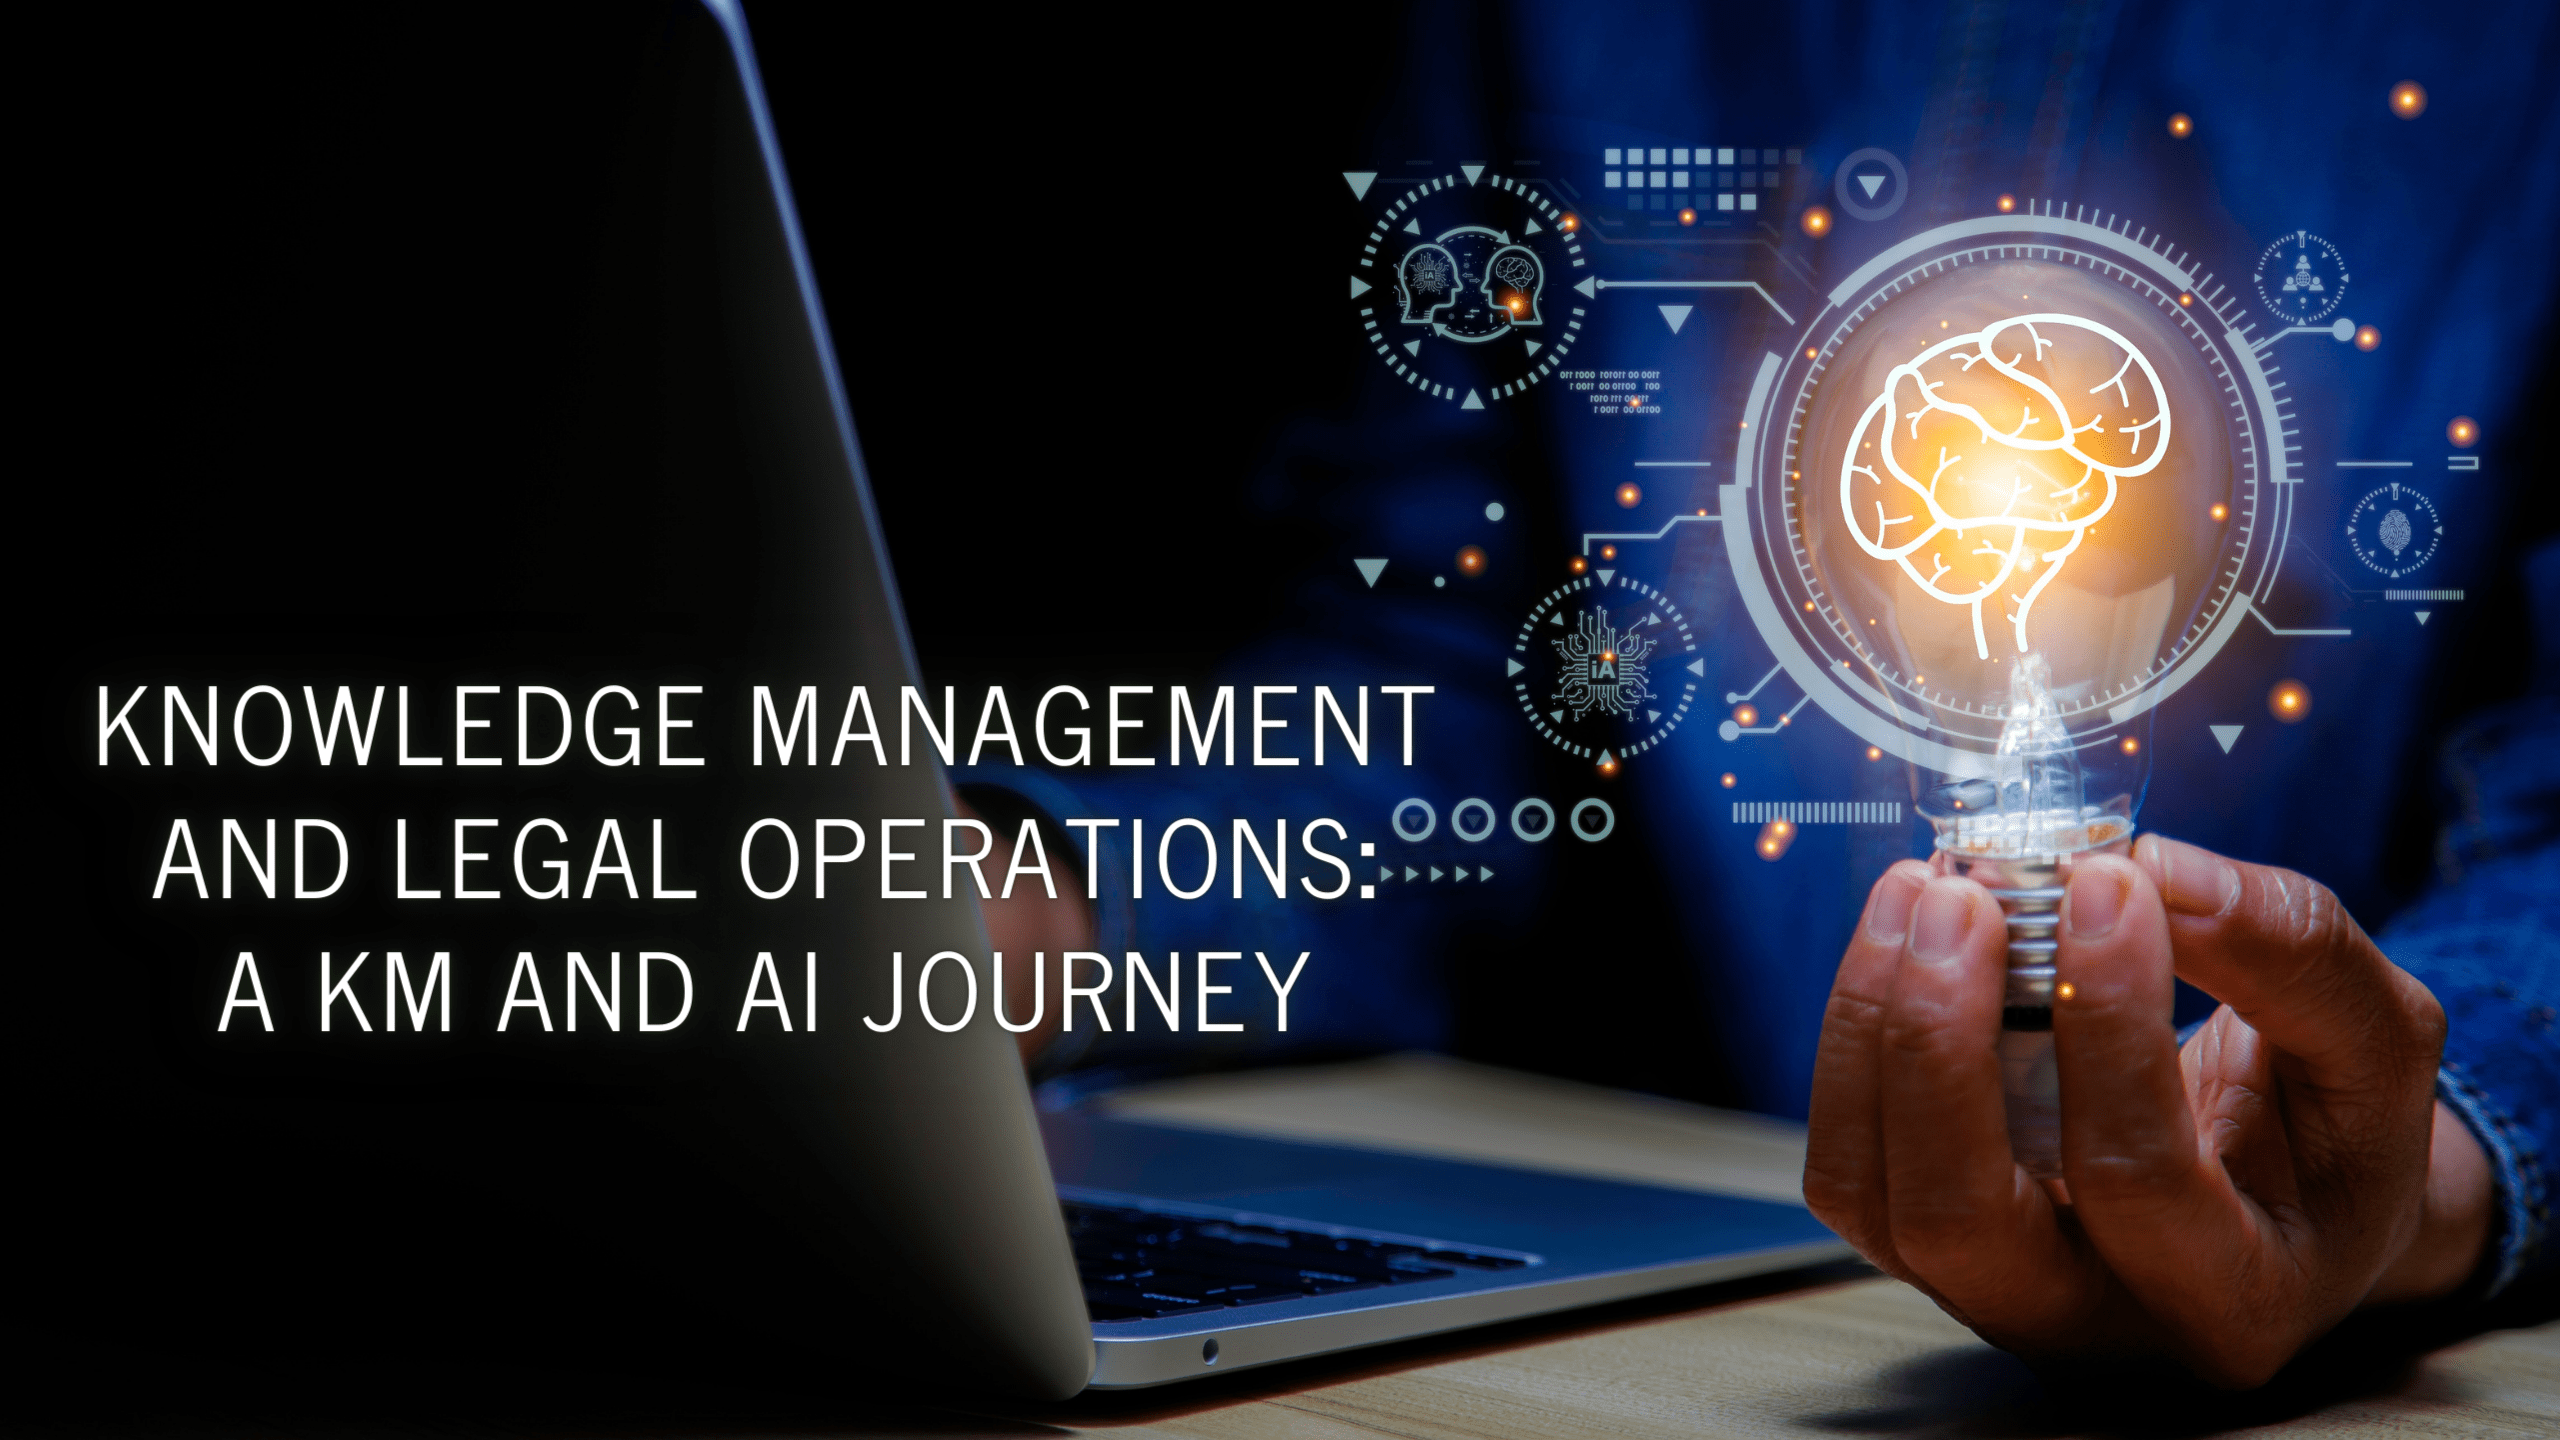 You are currently viewing Knowledge Management and Legal Operations: A KM and AI Journey